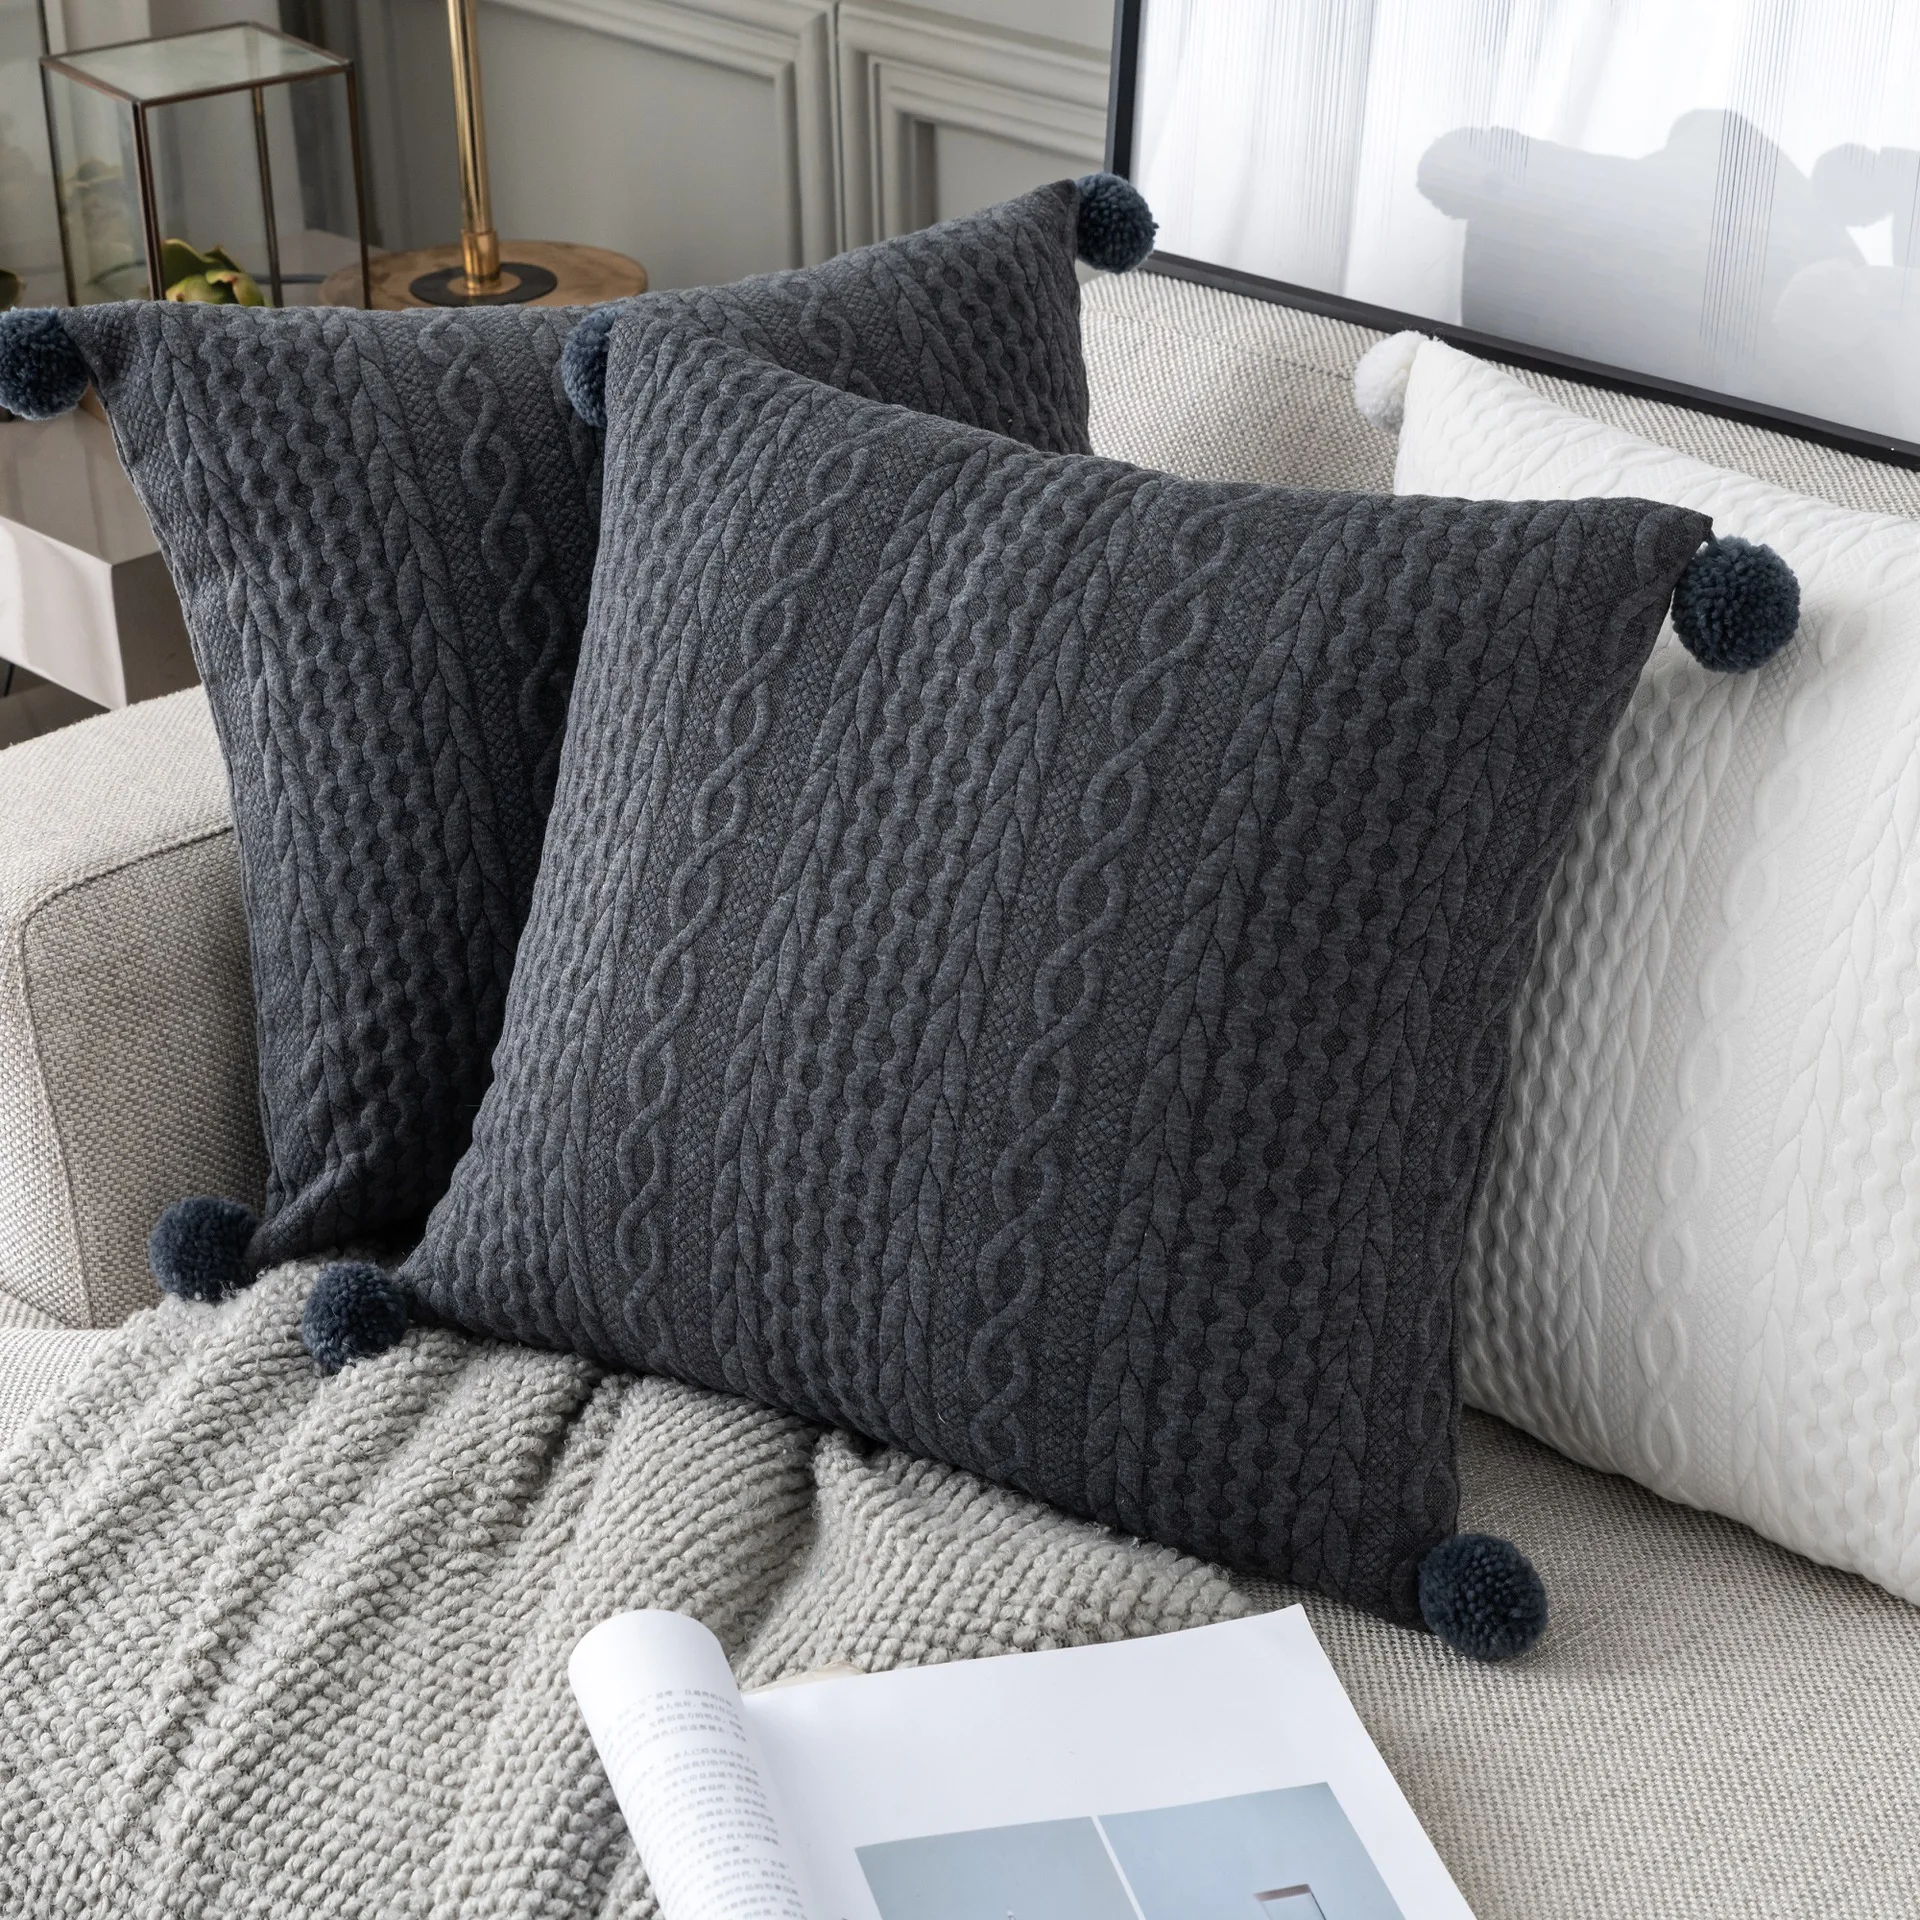 

Knitted Four Corners with Pompoms Cushion Cover Vintage Grey White Black Tassels Pillow Case 45x45cm Soft Home Decorative Pillow